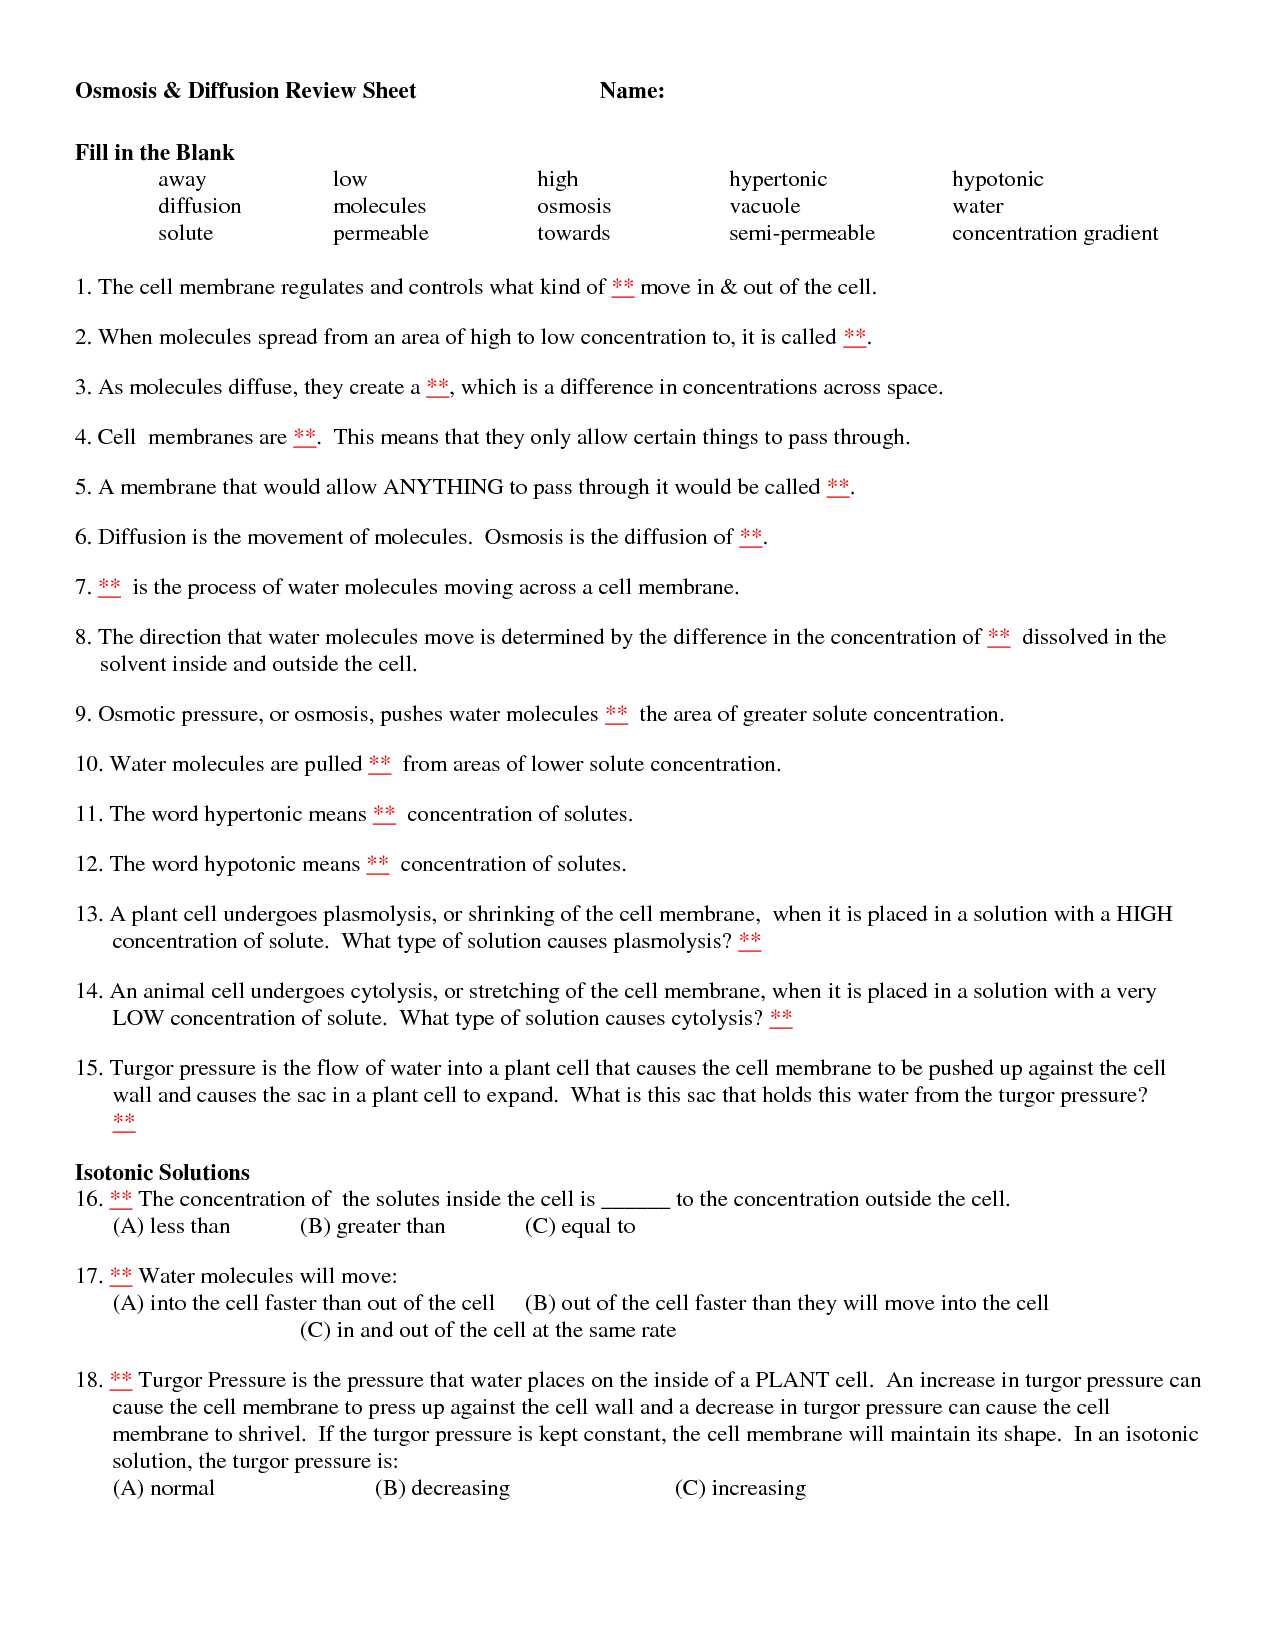 Osmosis Jones Video Worksheet as Well as 29 tonicity and Osmosis Worksheet Uncategorized Cell Membrane and